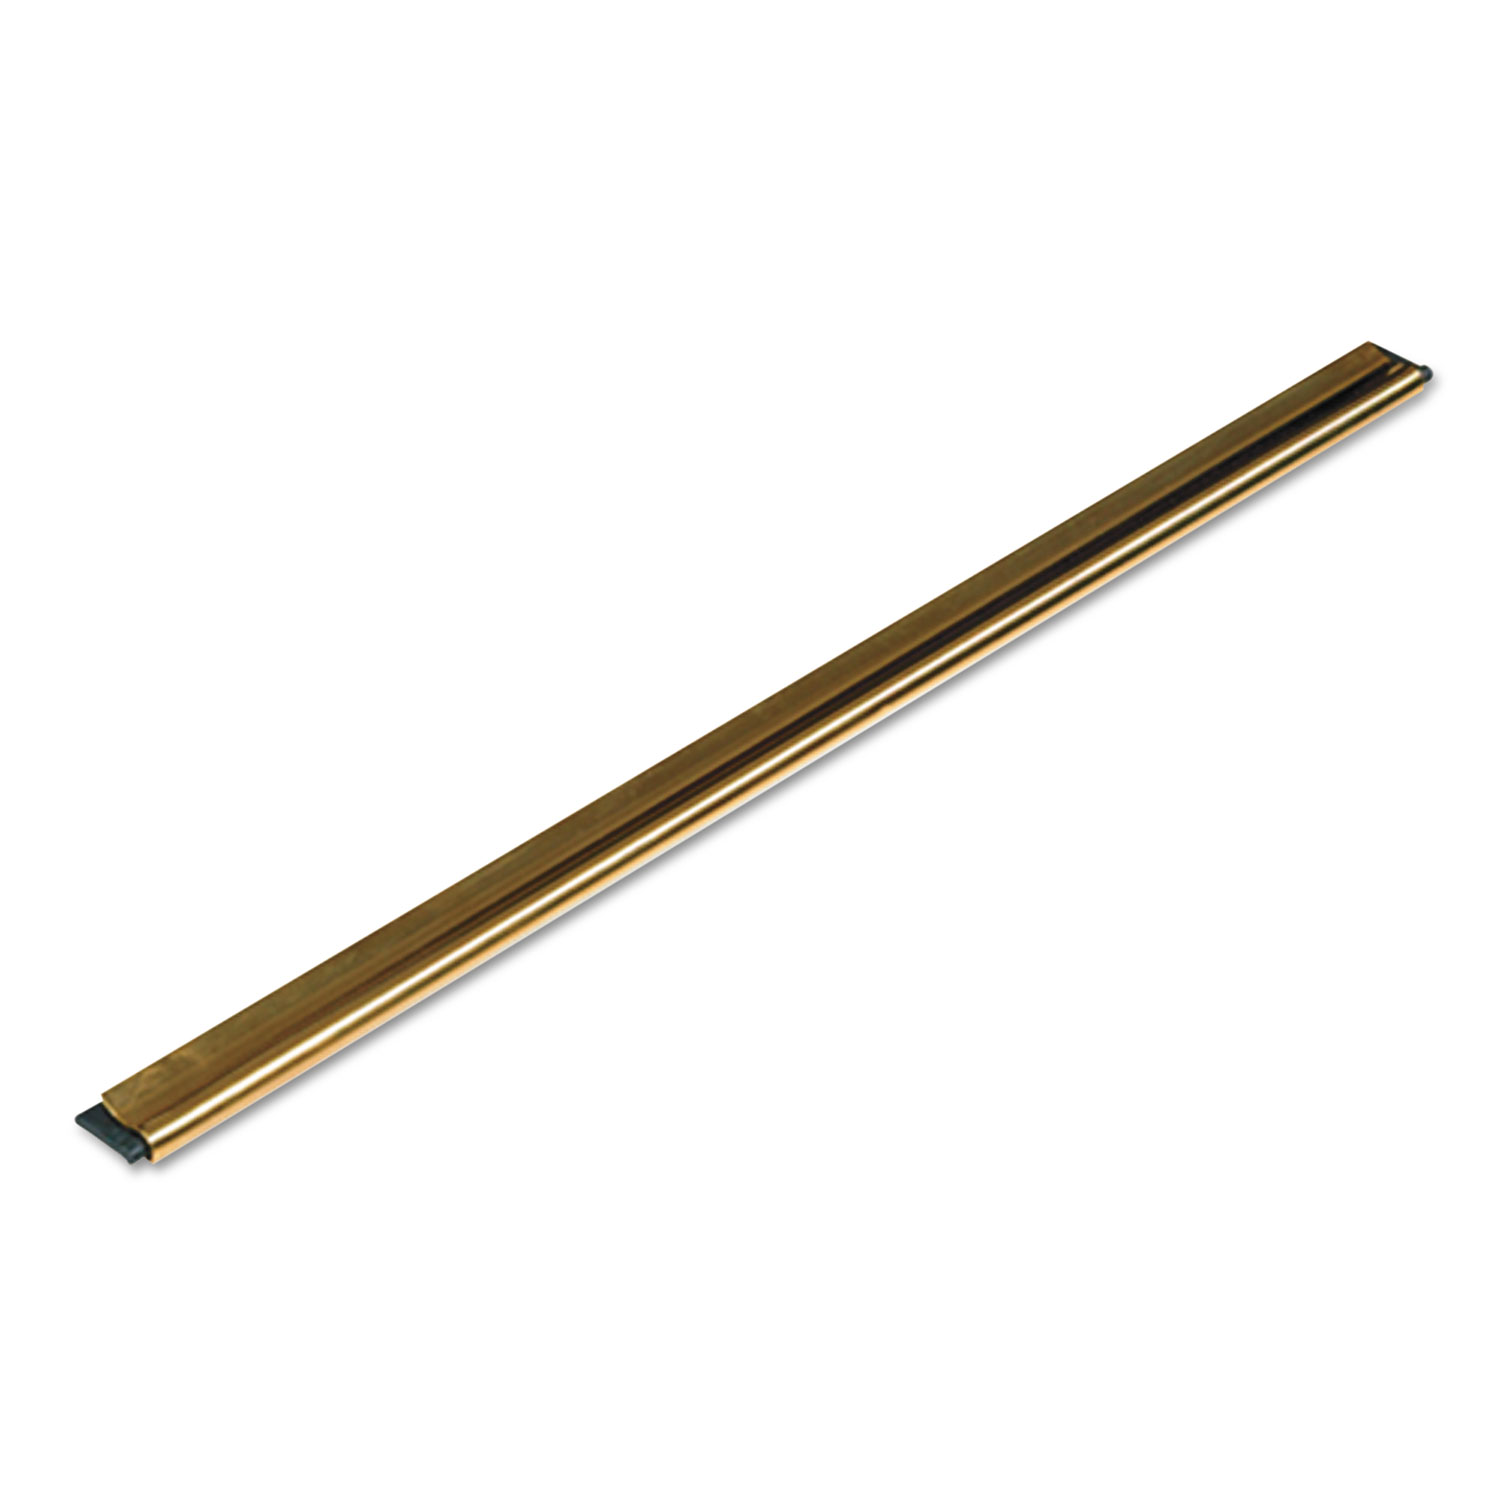  Unger GC300 Golden Clip Brass Channel with Black Rubber Blade & Clip, 12 Inches, Straight (UNGGC30) 